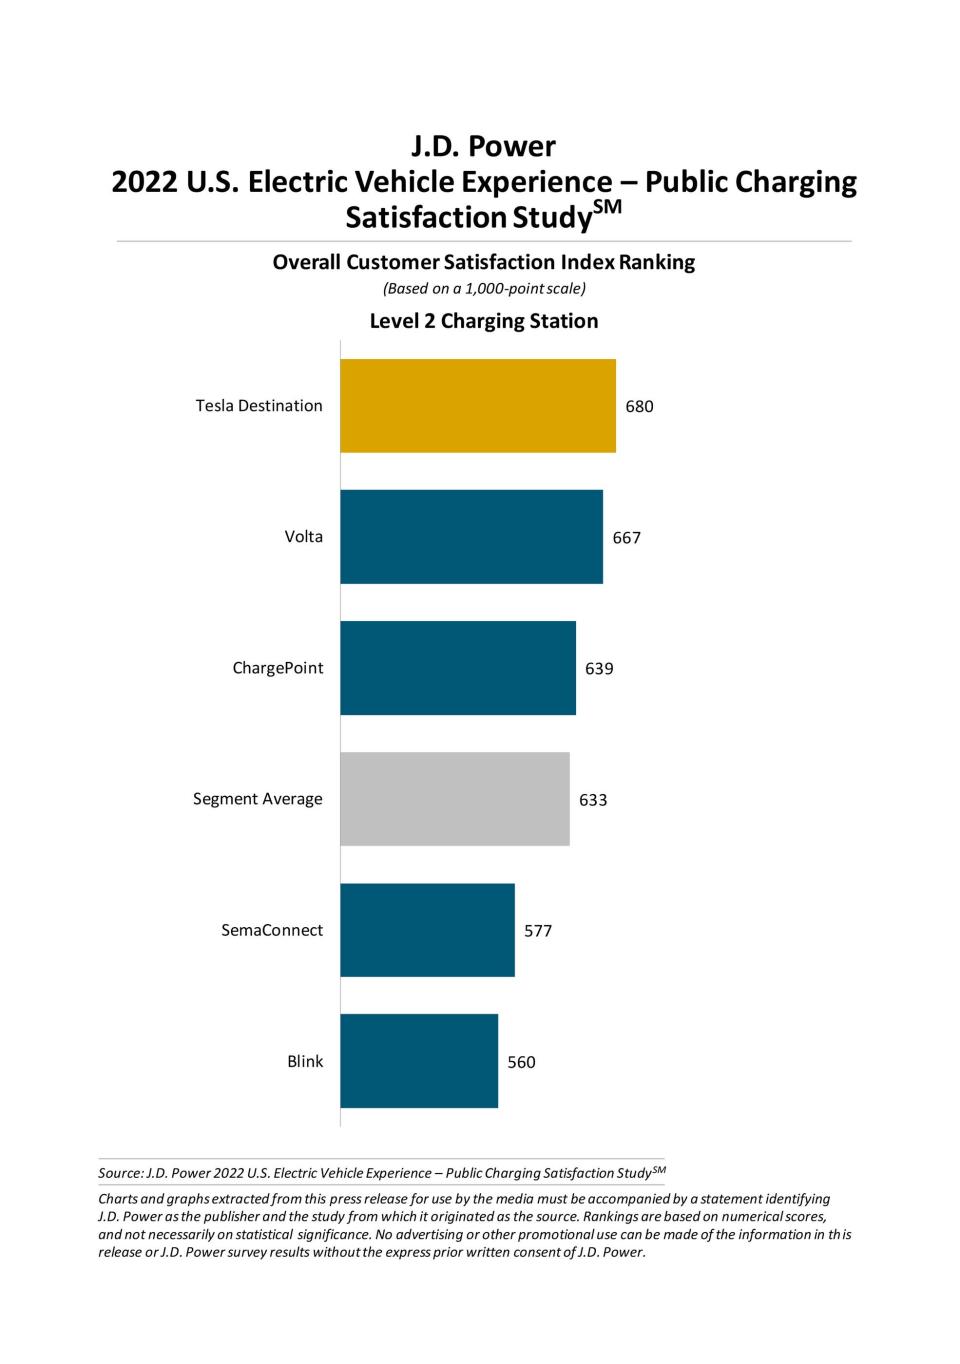 Data from the J.D. Power 2022 U.S. Electric Vehicle Experience – Public Charging Satisfaction Study. This data is the Overall Customer Satisfaction Index Ranking for the Level 2 Charging Station.